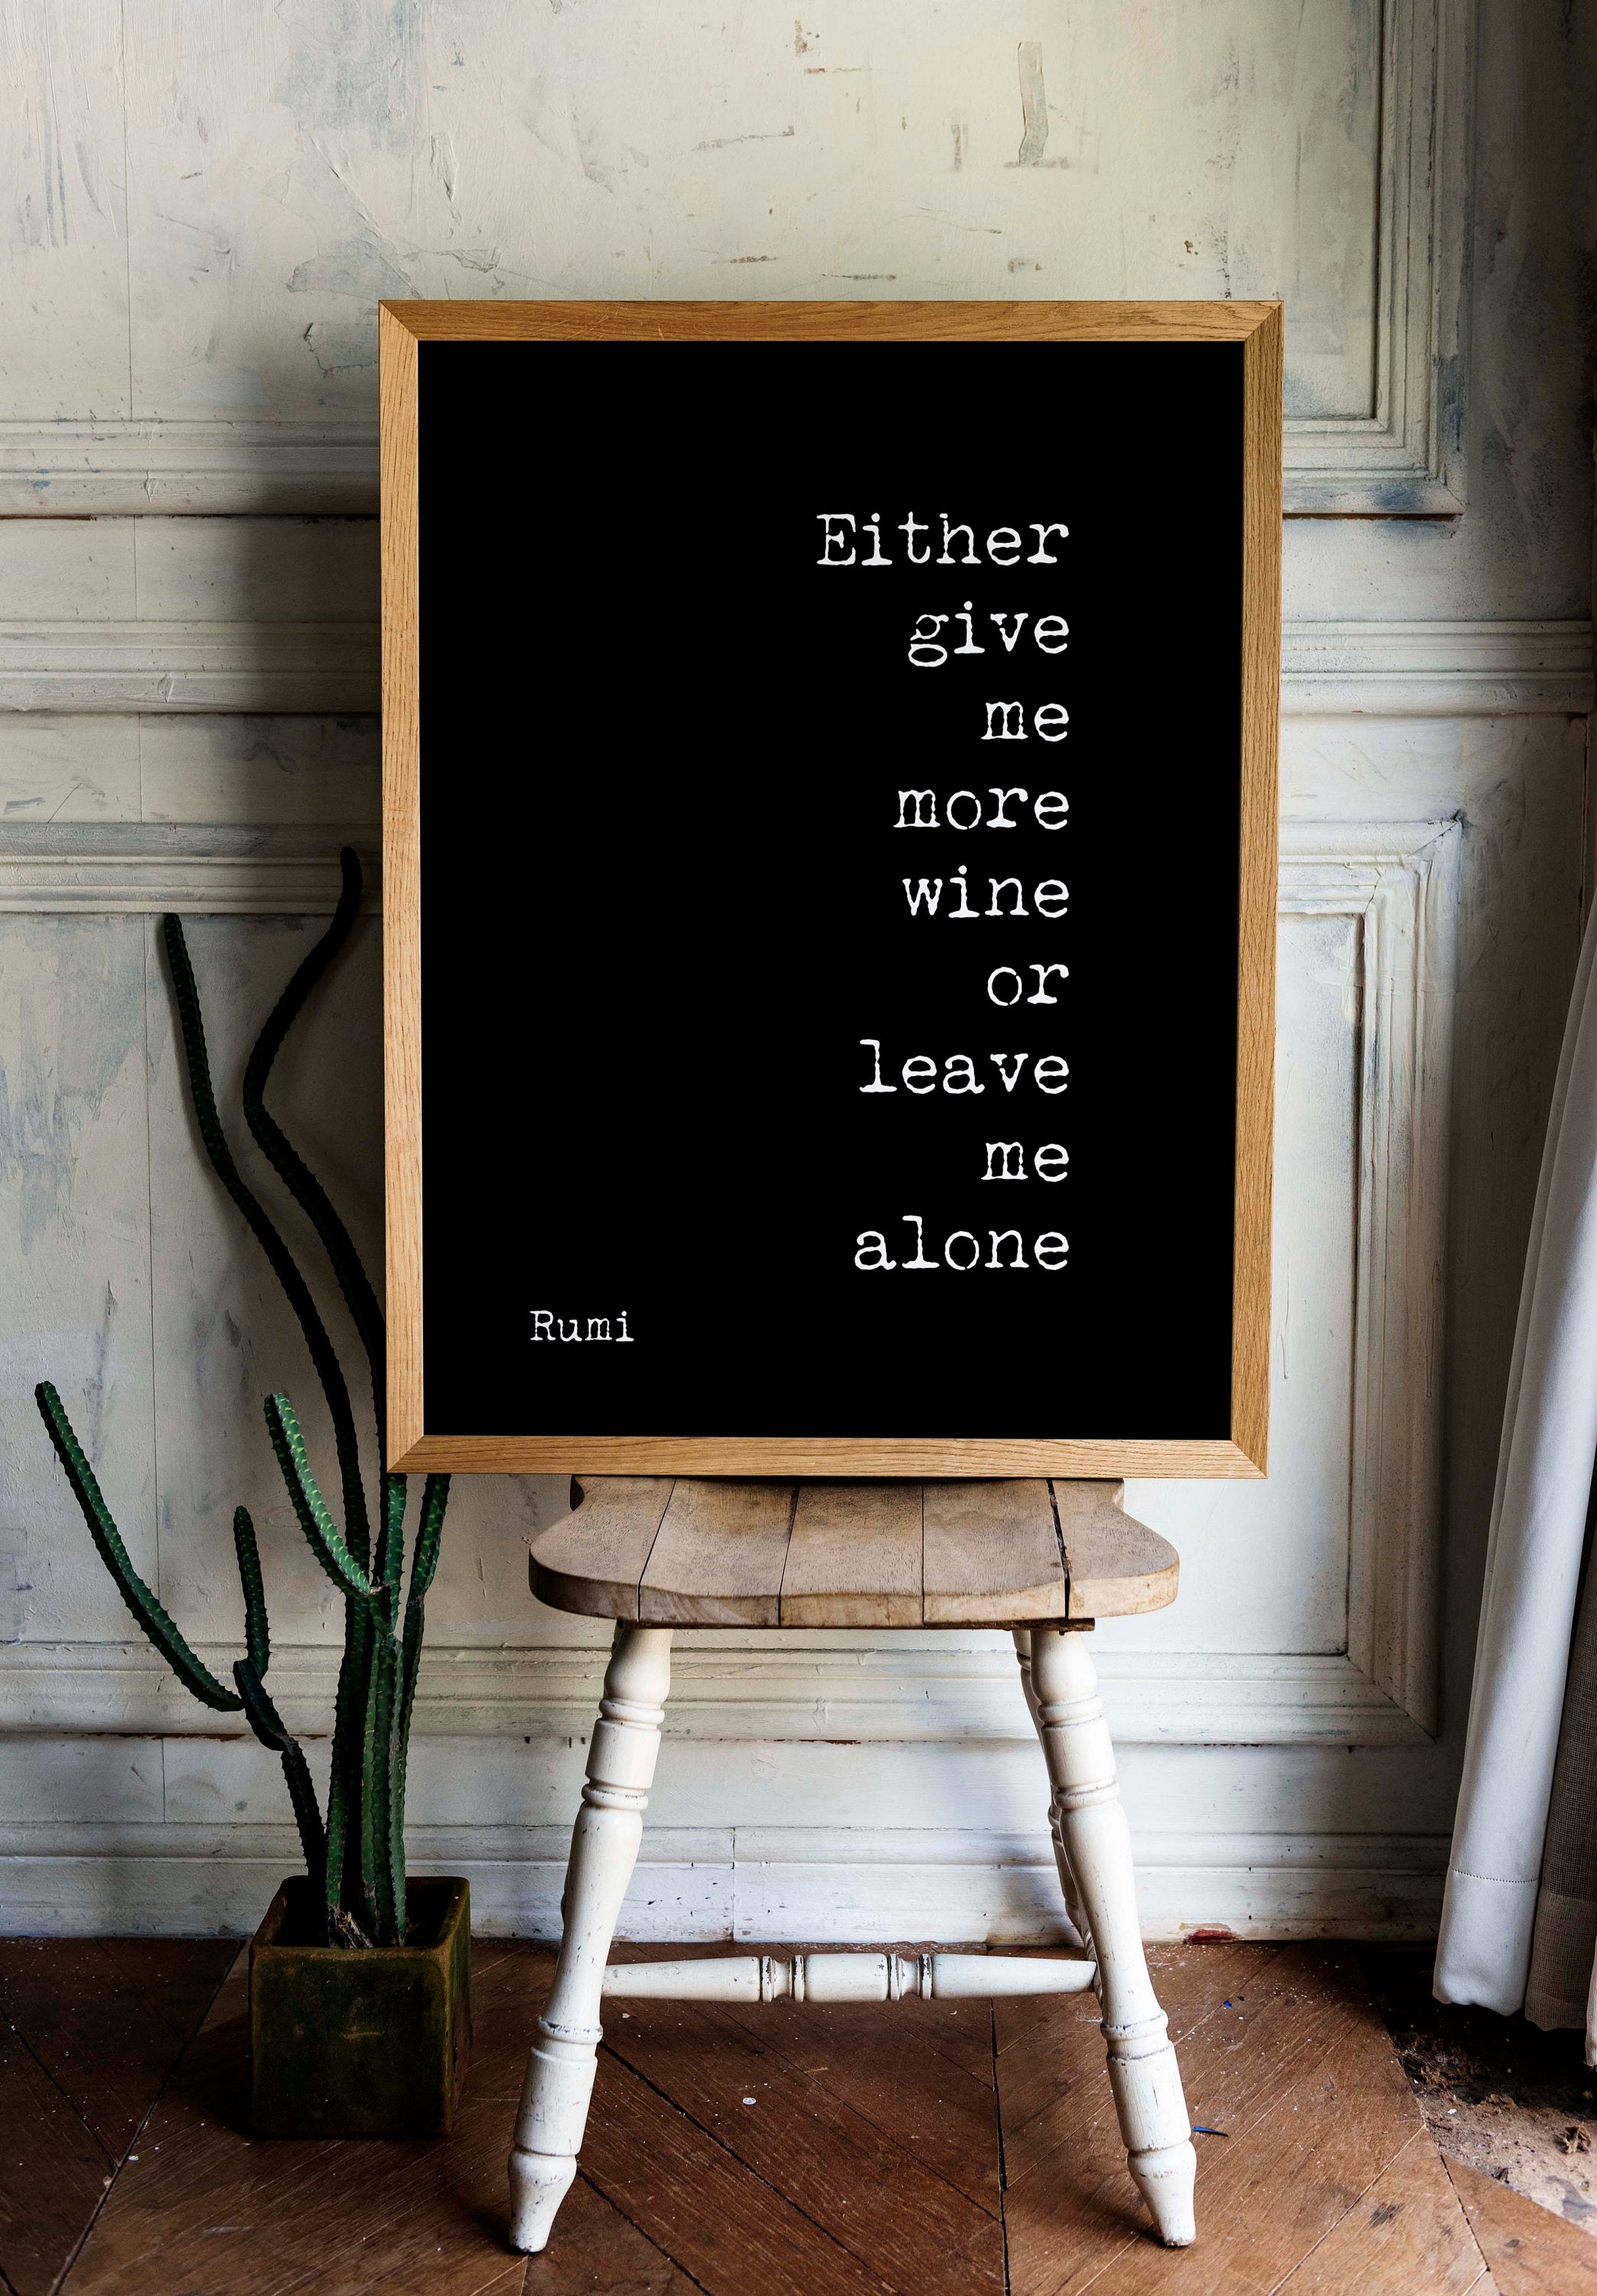 Rumi Quote Print in Black And White, Give Me More Wine, Ideal Wine Wall Art For Dining Room Wall Art Or A Kitchen Decor, Unframed - BookQuoteDecor